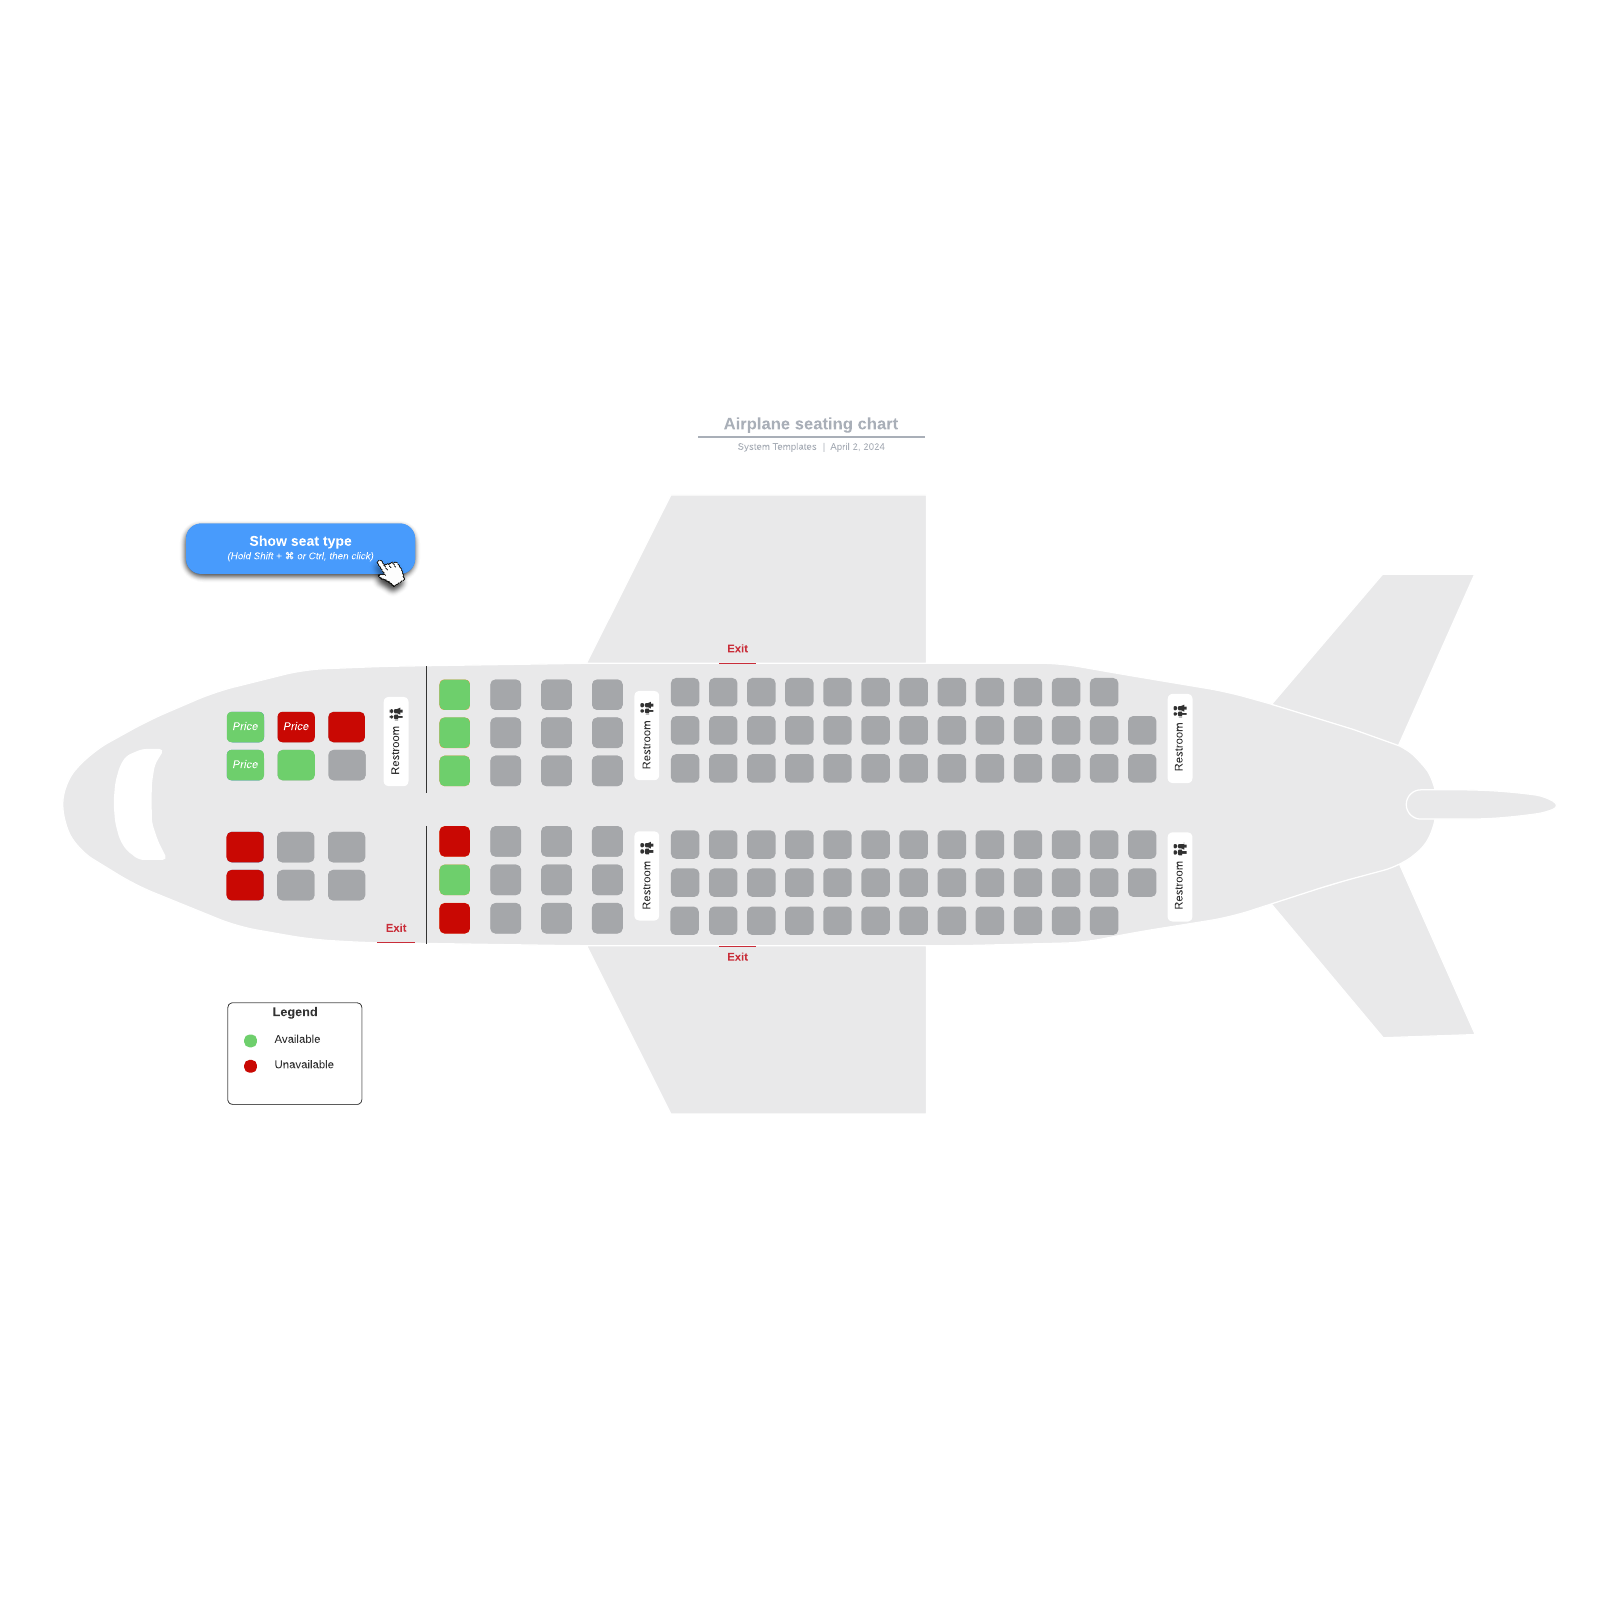 Airplane seating chart example